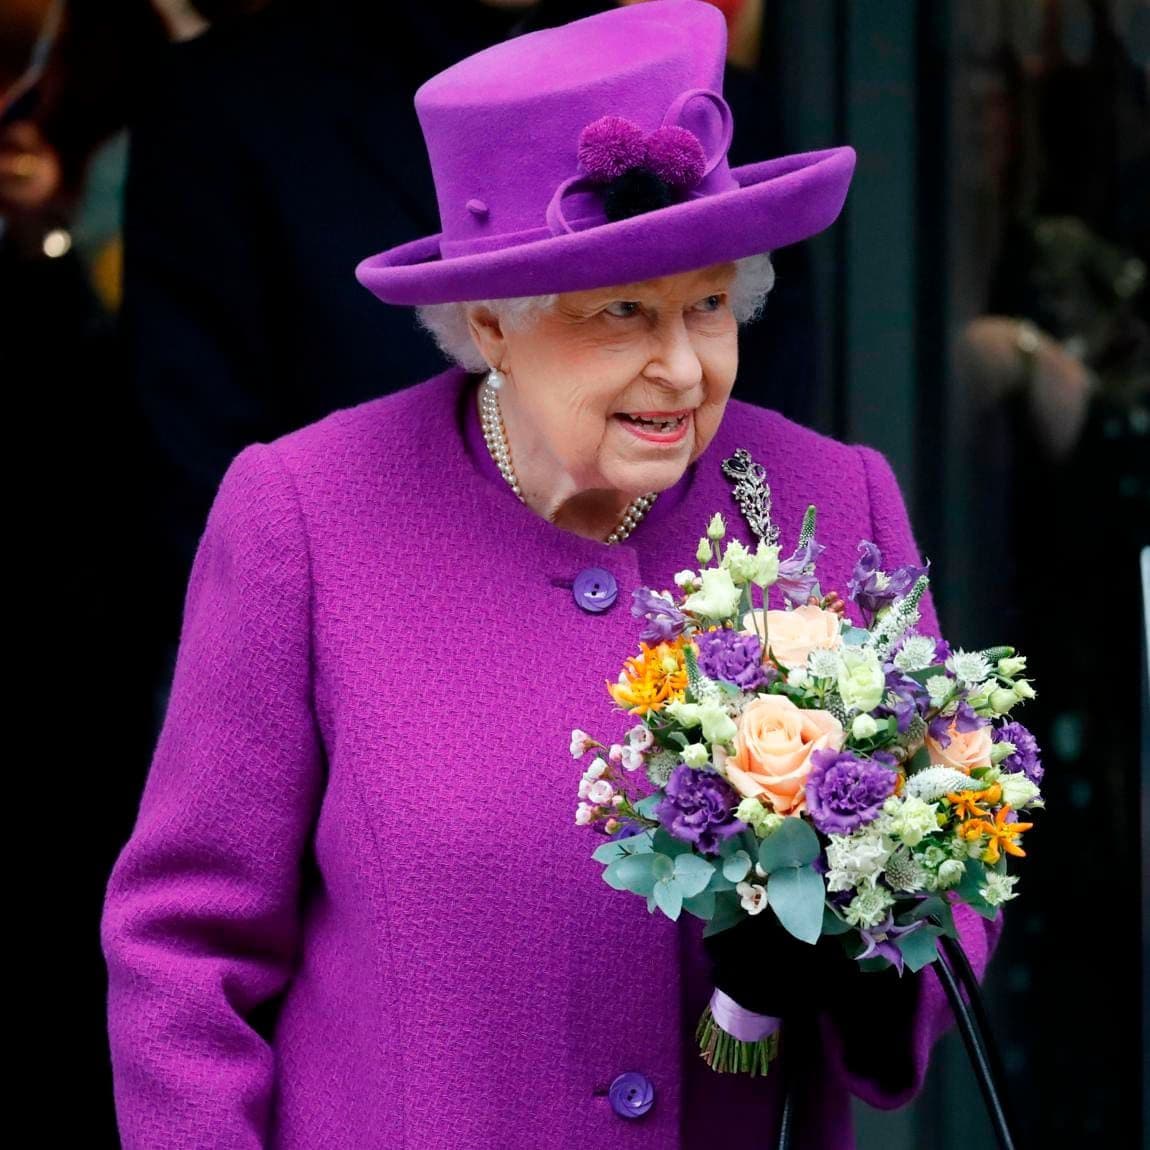 The Queen has had to reschedule engagements due to the coronavirus